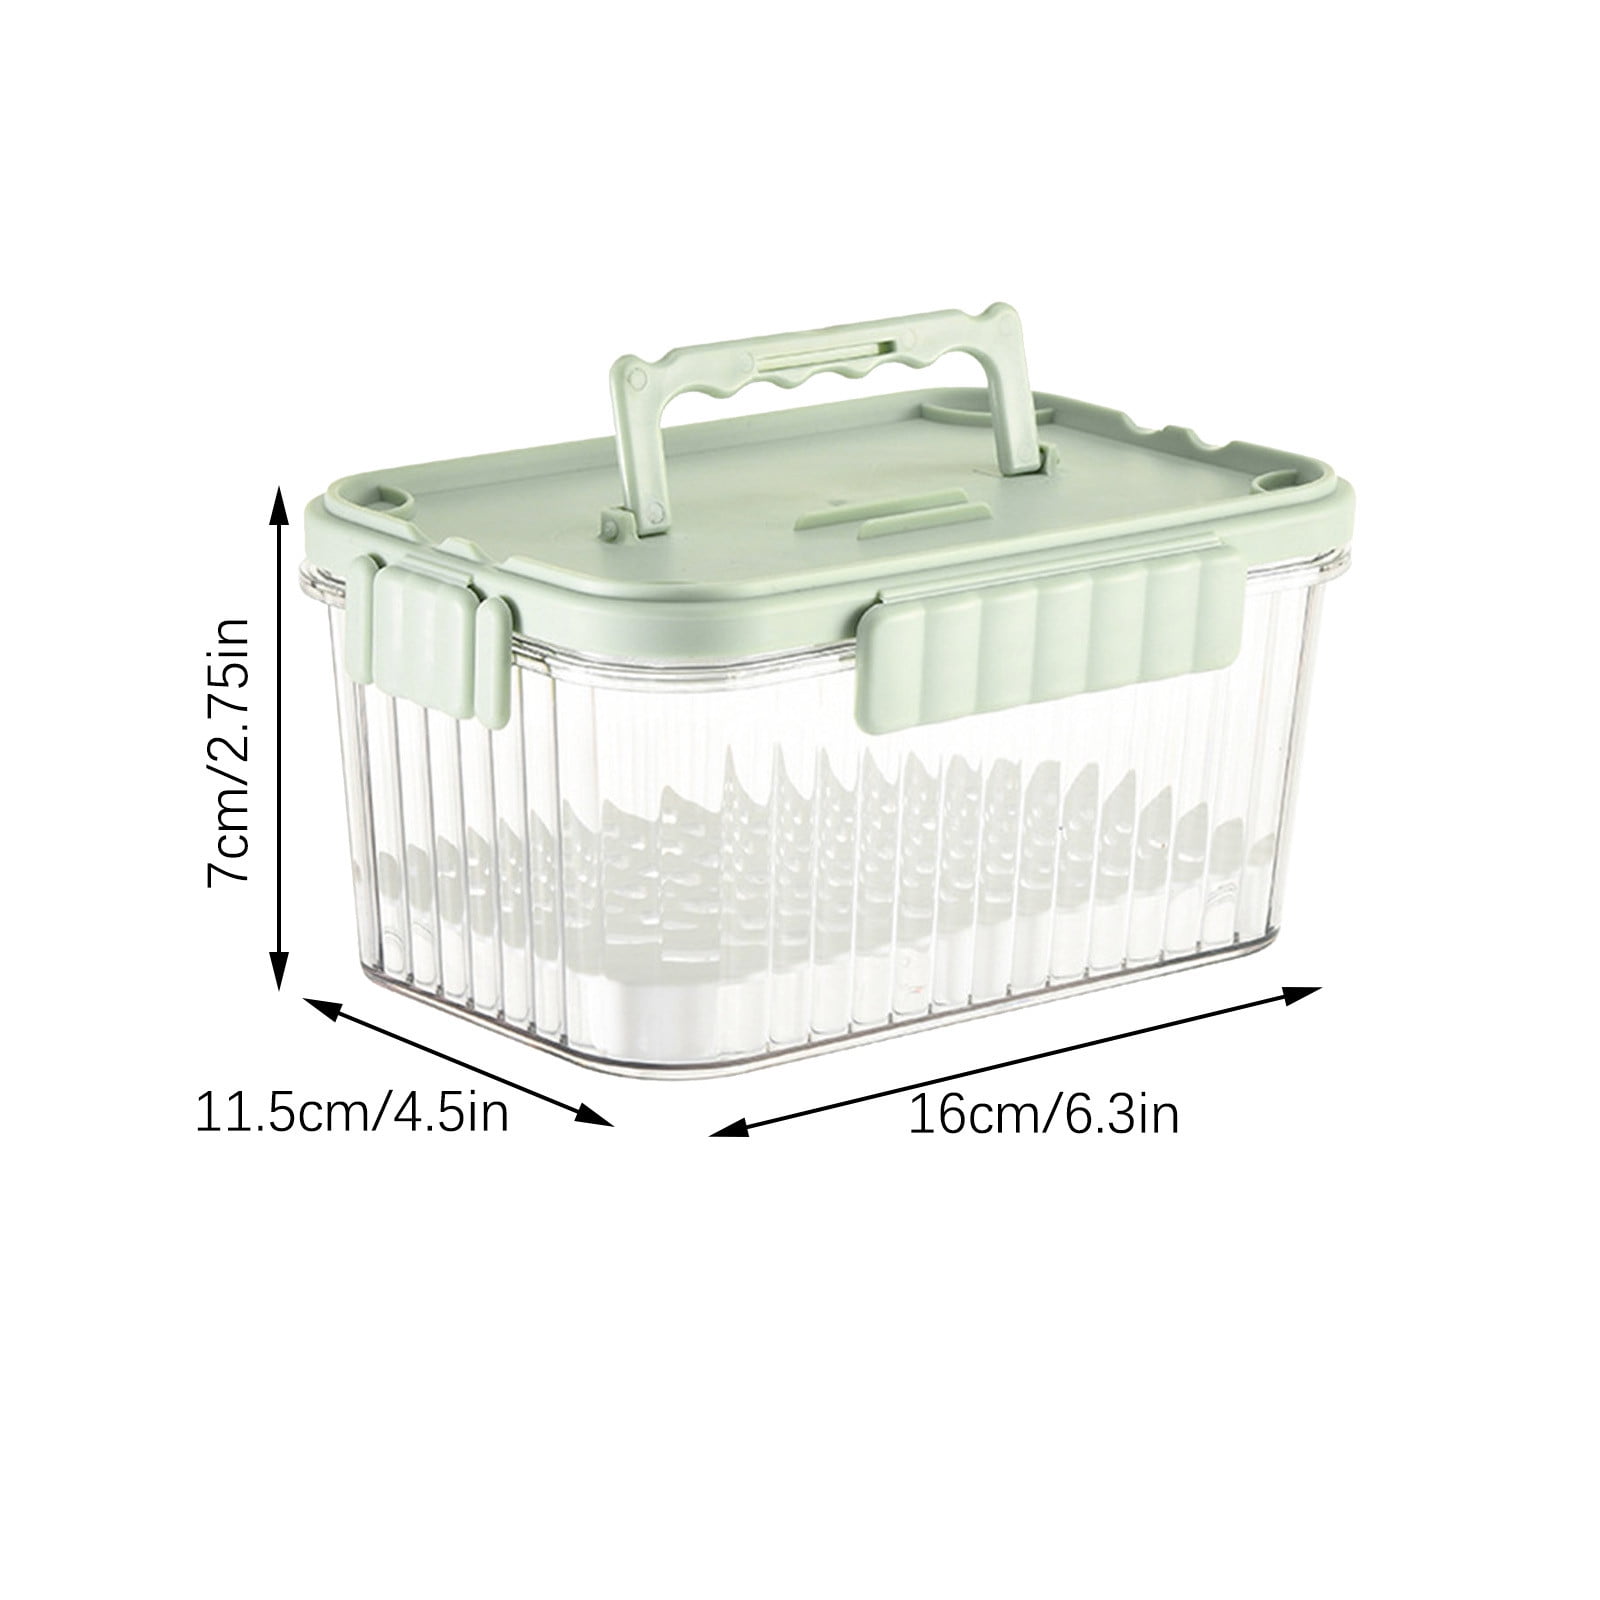 Lwithszg Food Storage Container with Dividers / Food Storage Bin Dividers Tray with Lid 5 Compartment Stackable Produce Saver Snackle Box for Fruit